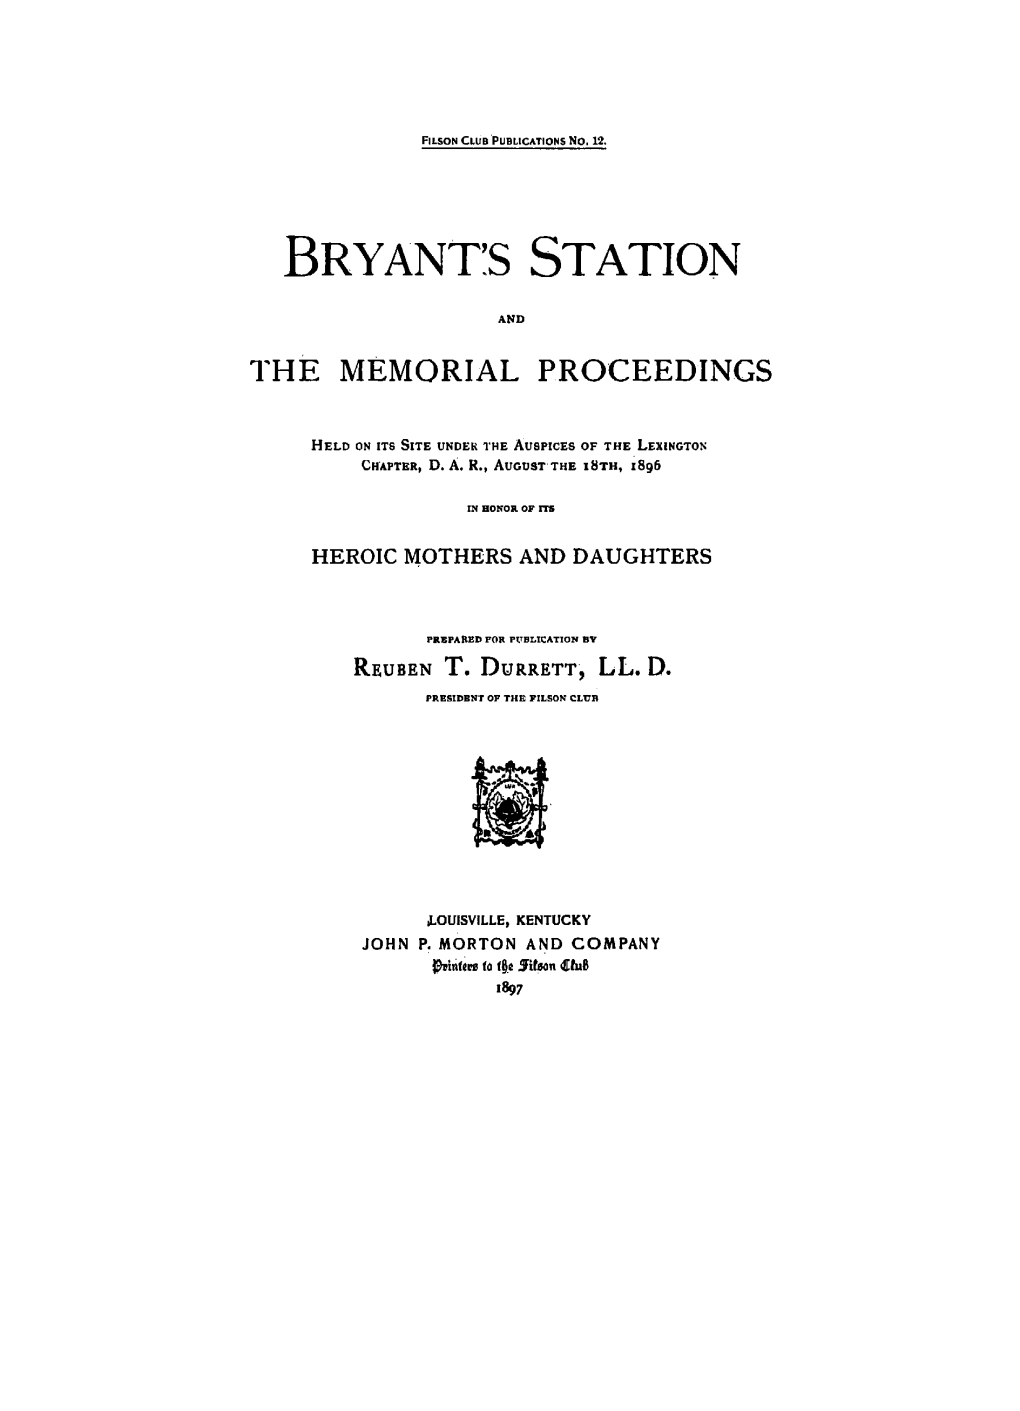 The Siege of Bryan's Station